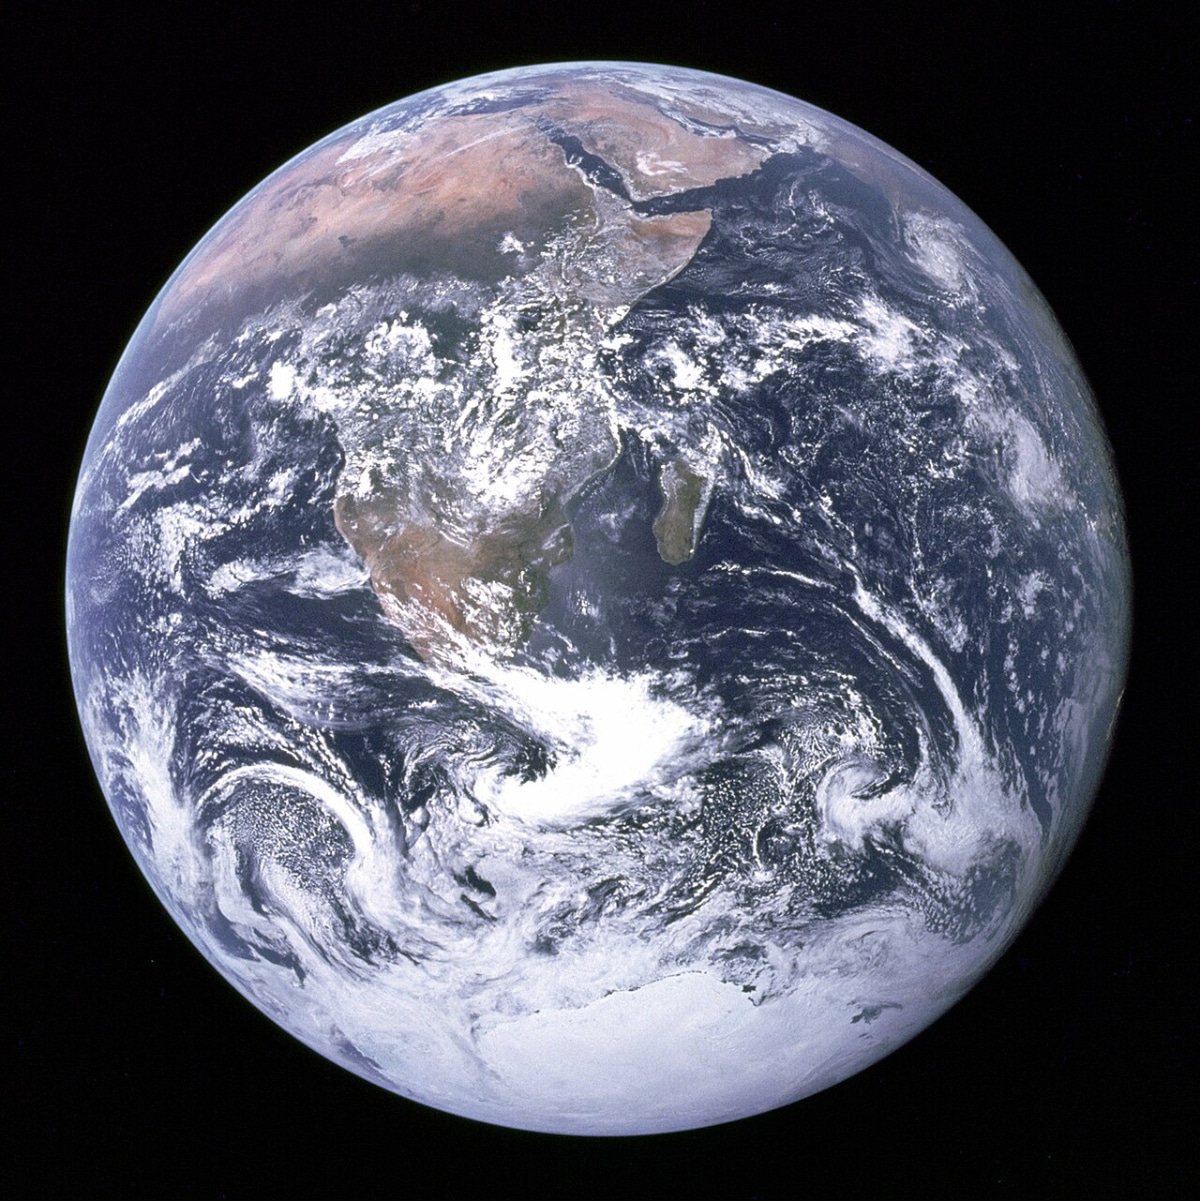 The Blue Marble: Earth's Iconic Portrait from Apollo 17